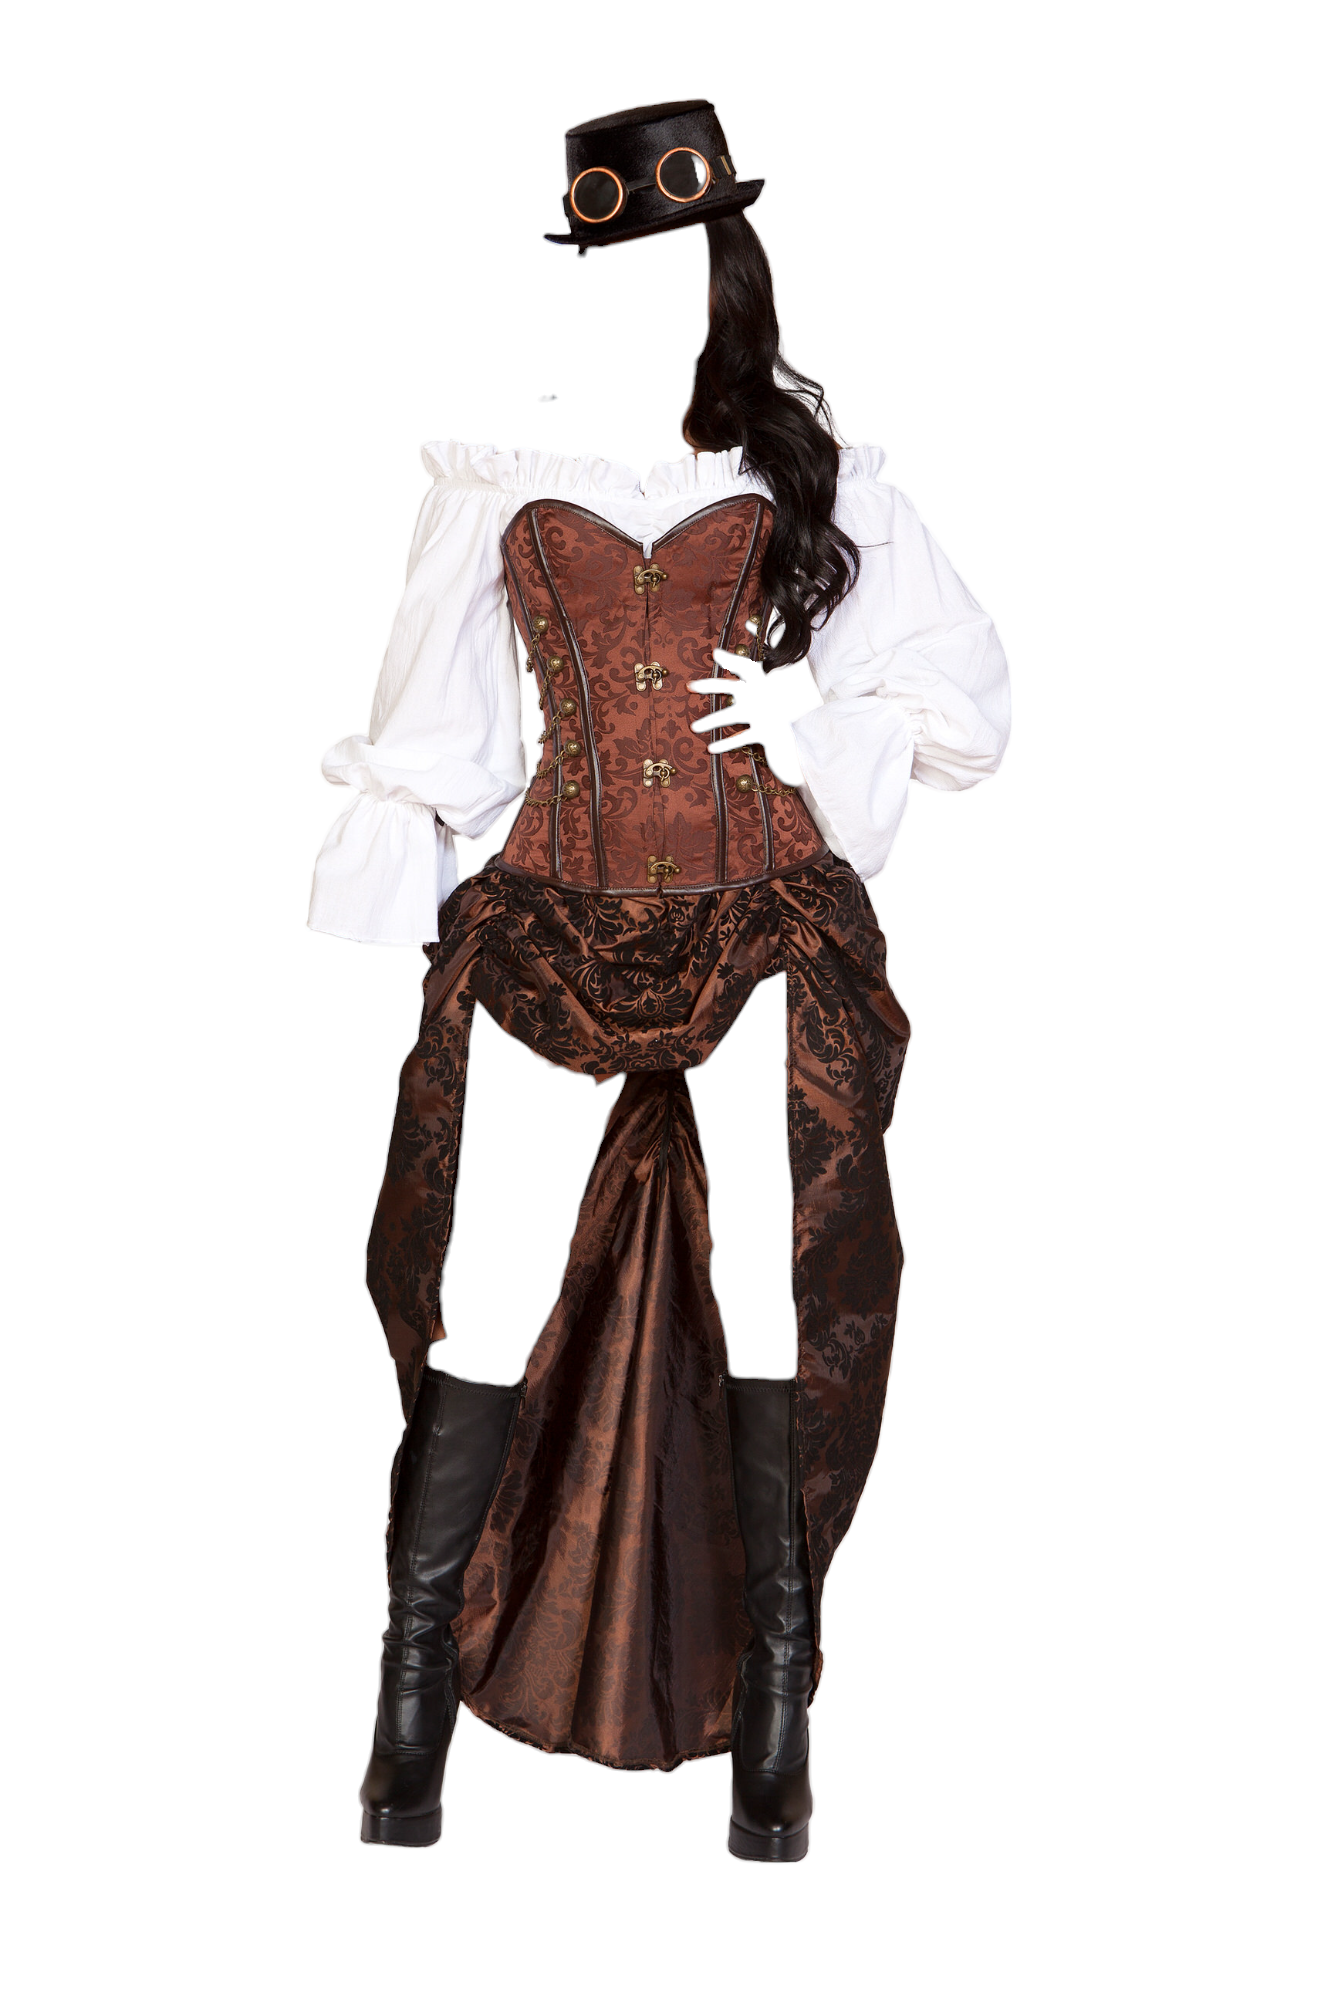 Roma Costume 6 PC Machinery Steampunk Top with Corset & High Cut Skirt Costume Set Black/Ivory